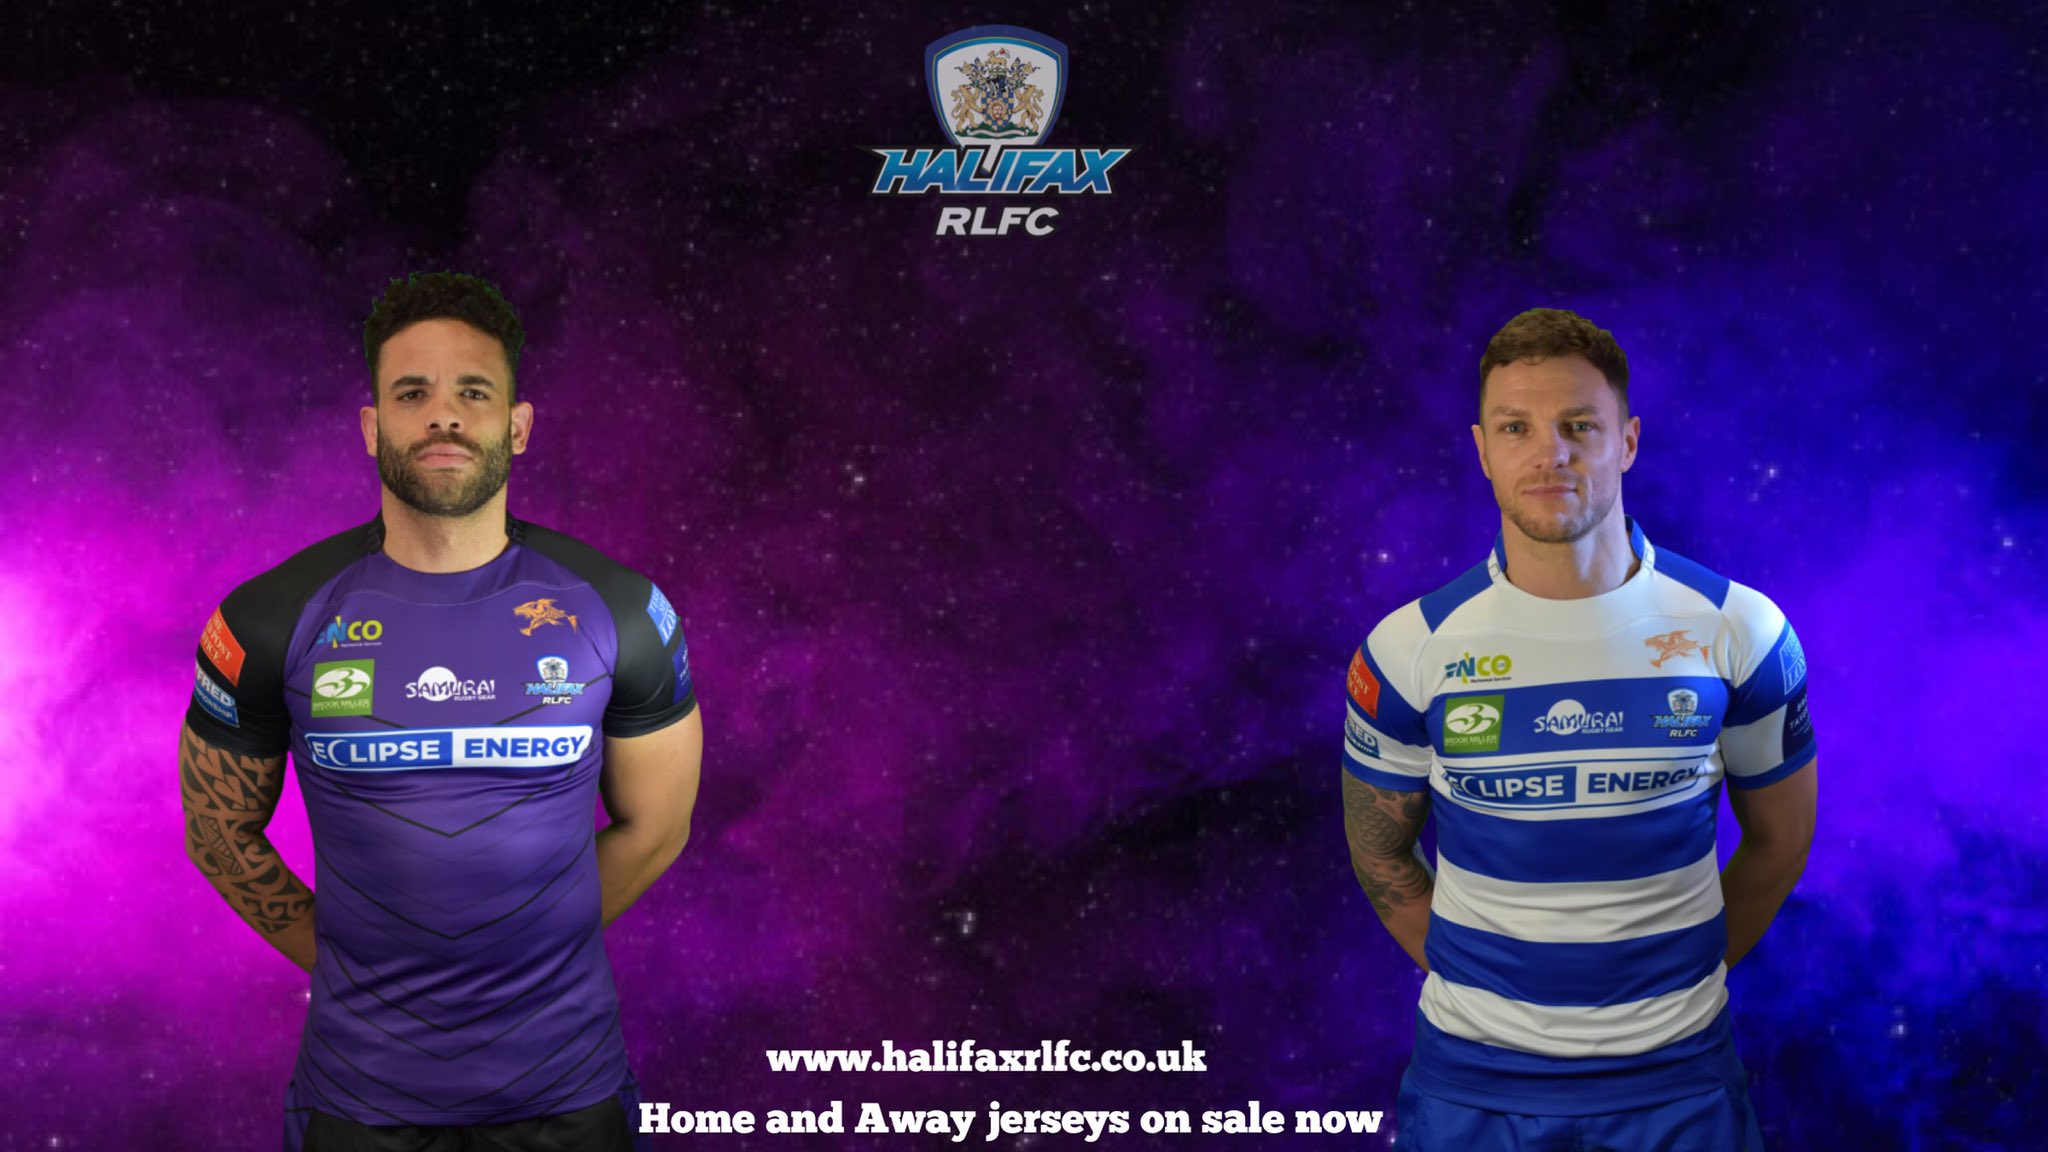 2020 rugby league kits